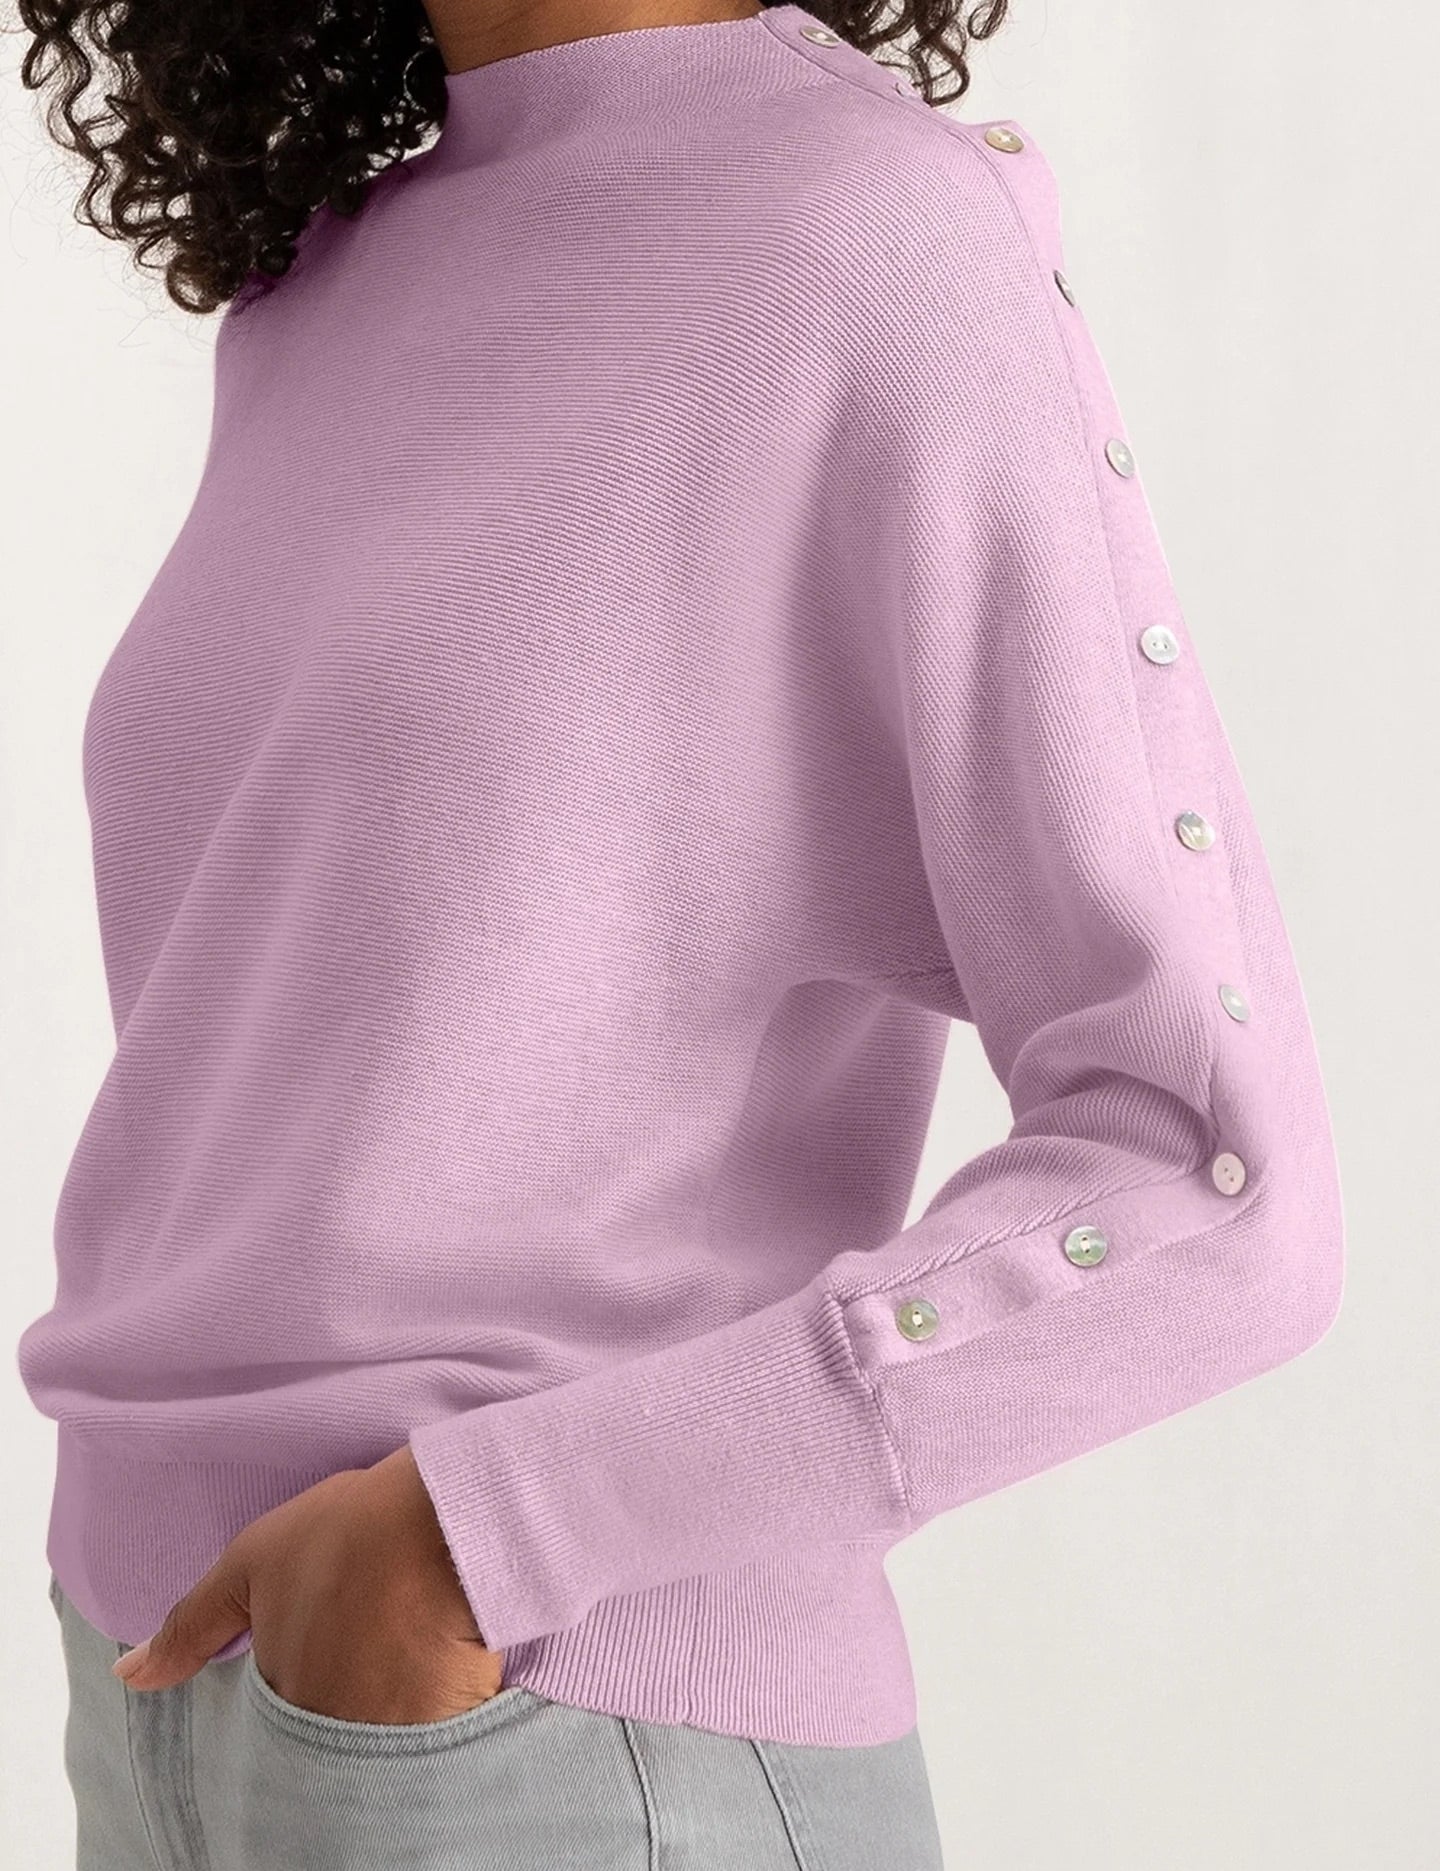 sweater-with-boatneck-long-sleeves-and-button-details-lady-pink-melange_5fec2199-a2f8-4bae-b3c1-24cc4856879b_2880x_jpg.jpg